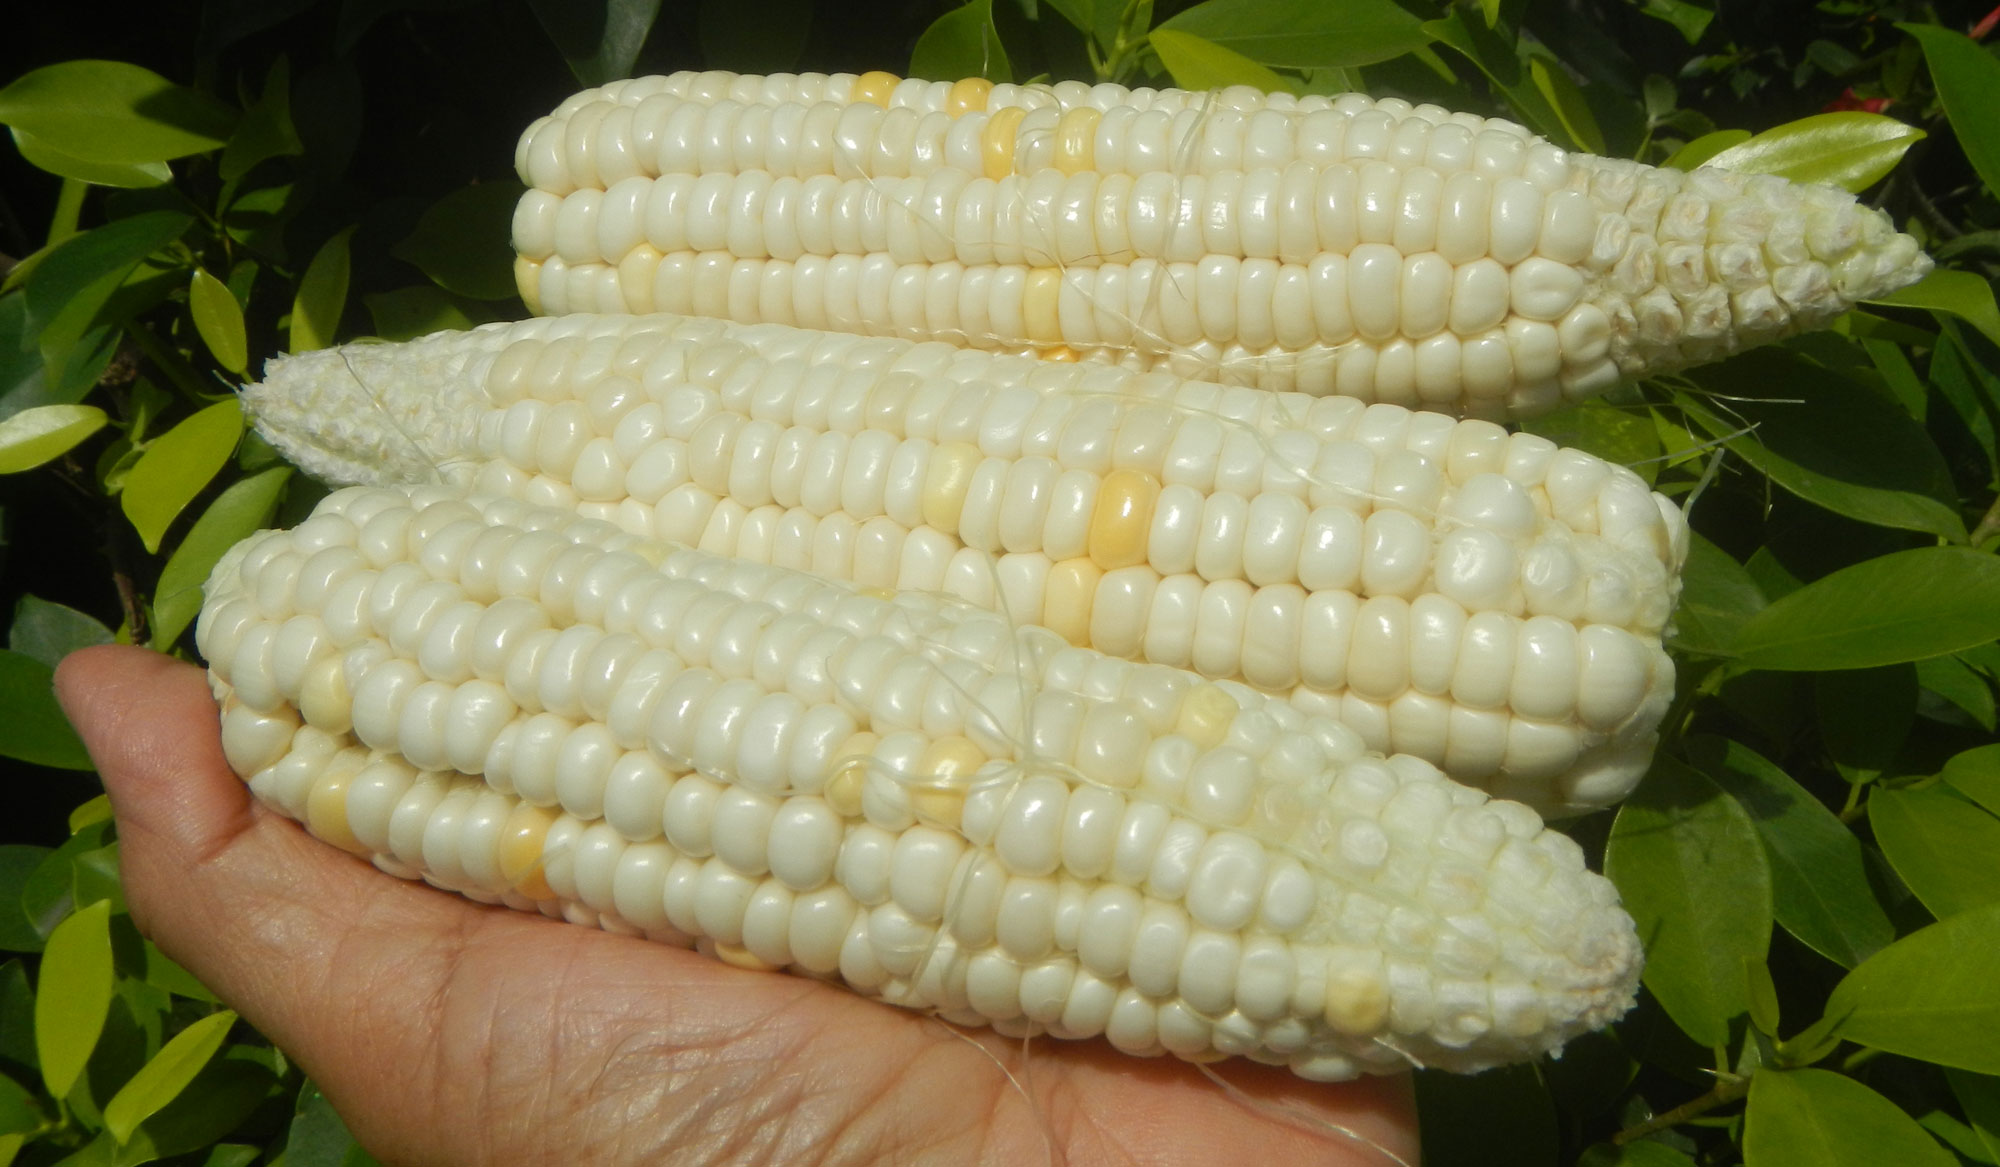 Photograph of a hand holding three ears of waxy corn. The ears of corn are relatively small and the kernels are light yellow in color.